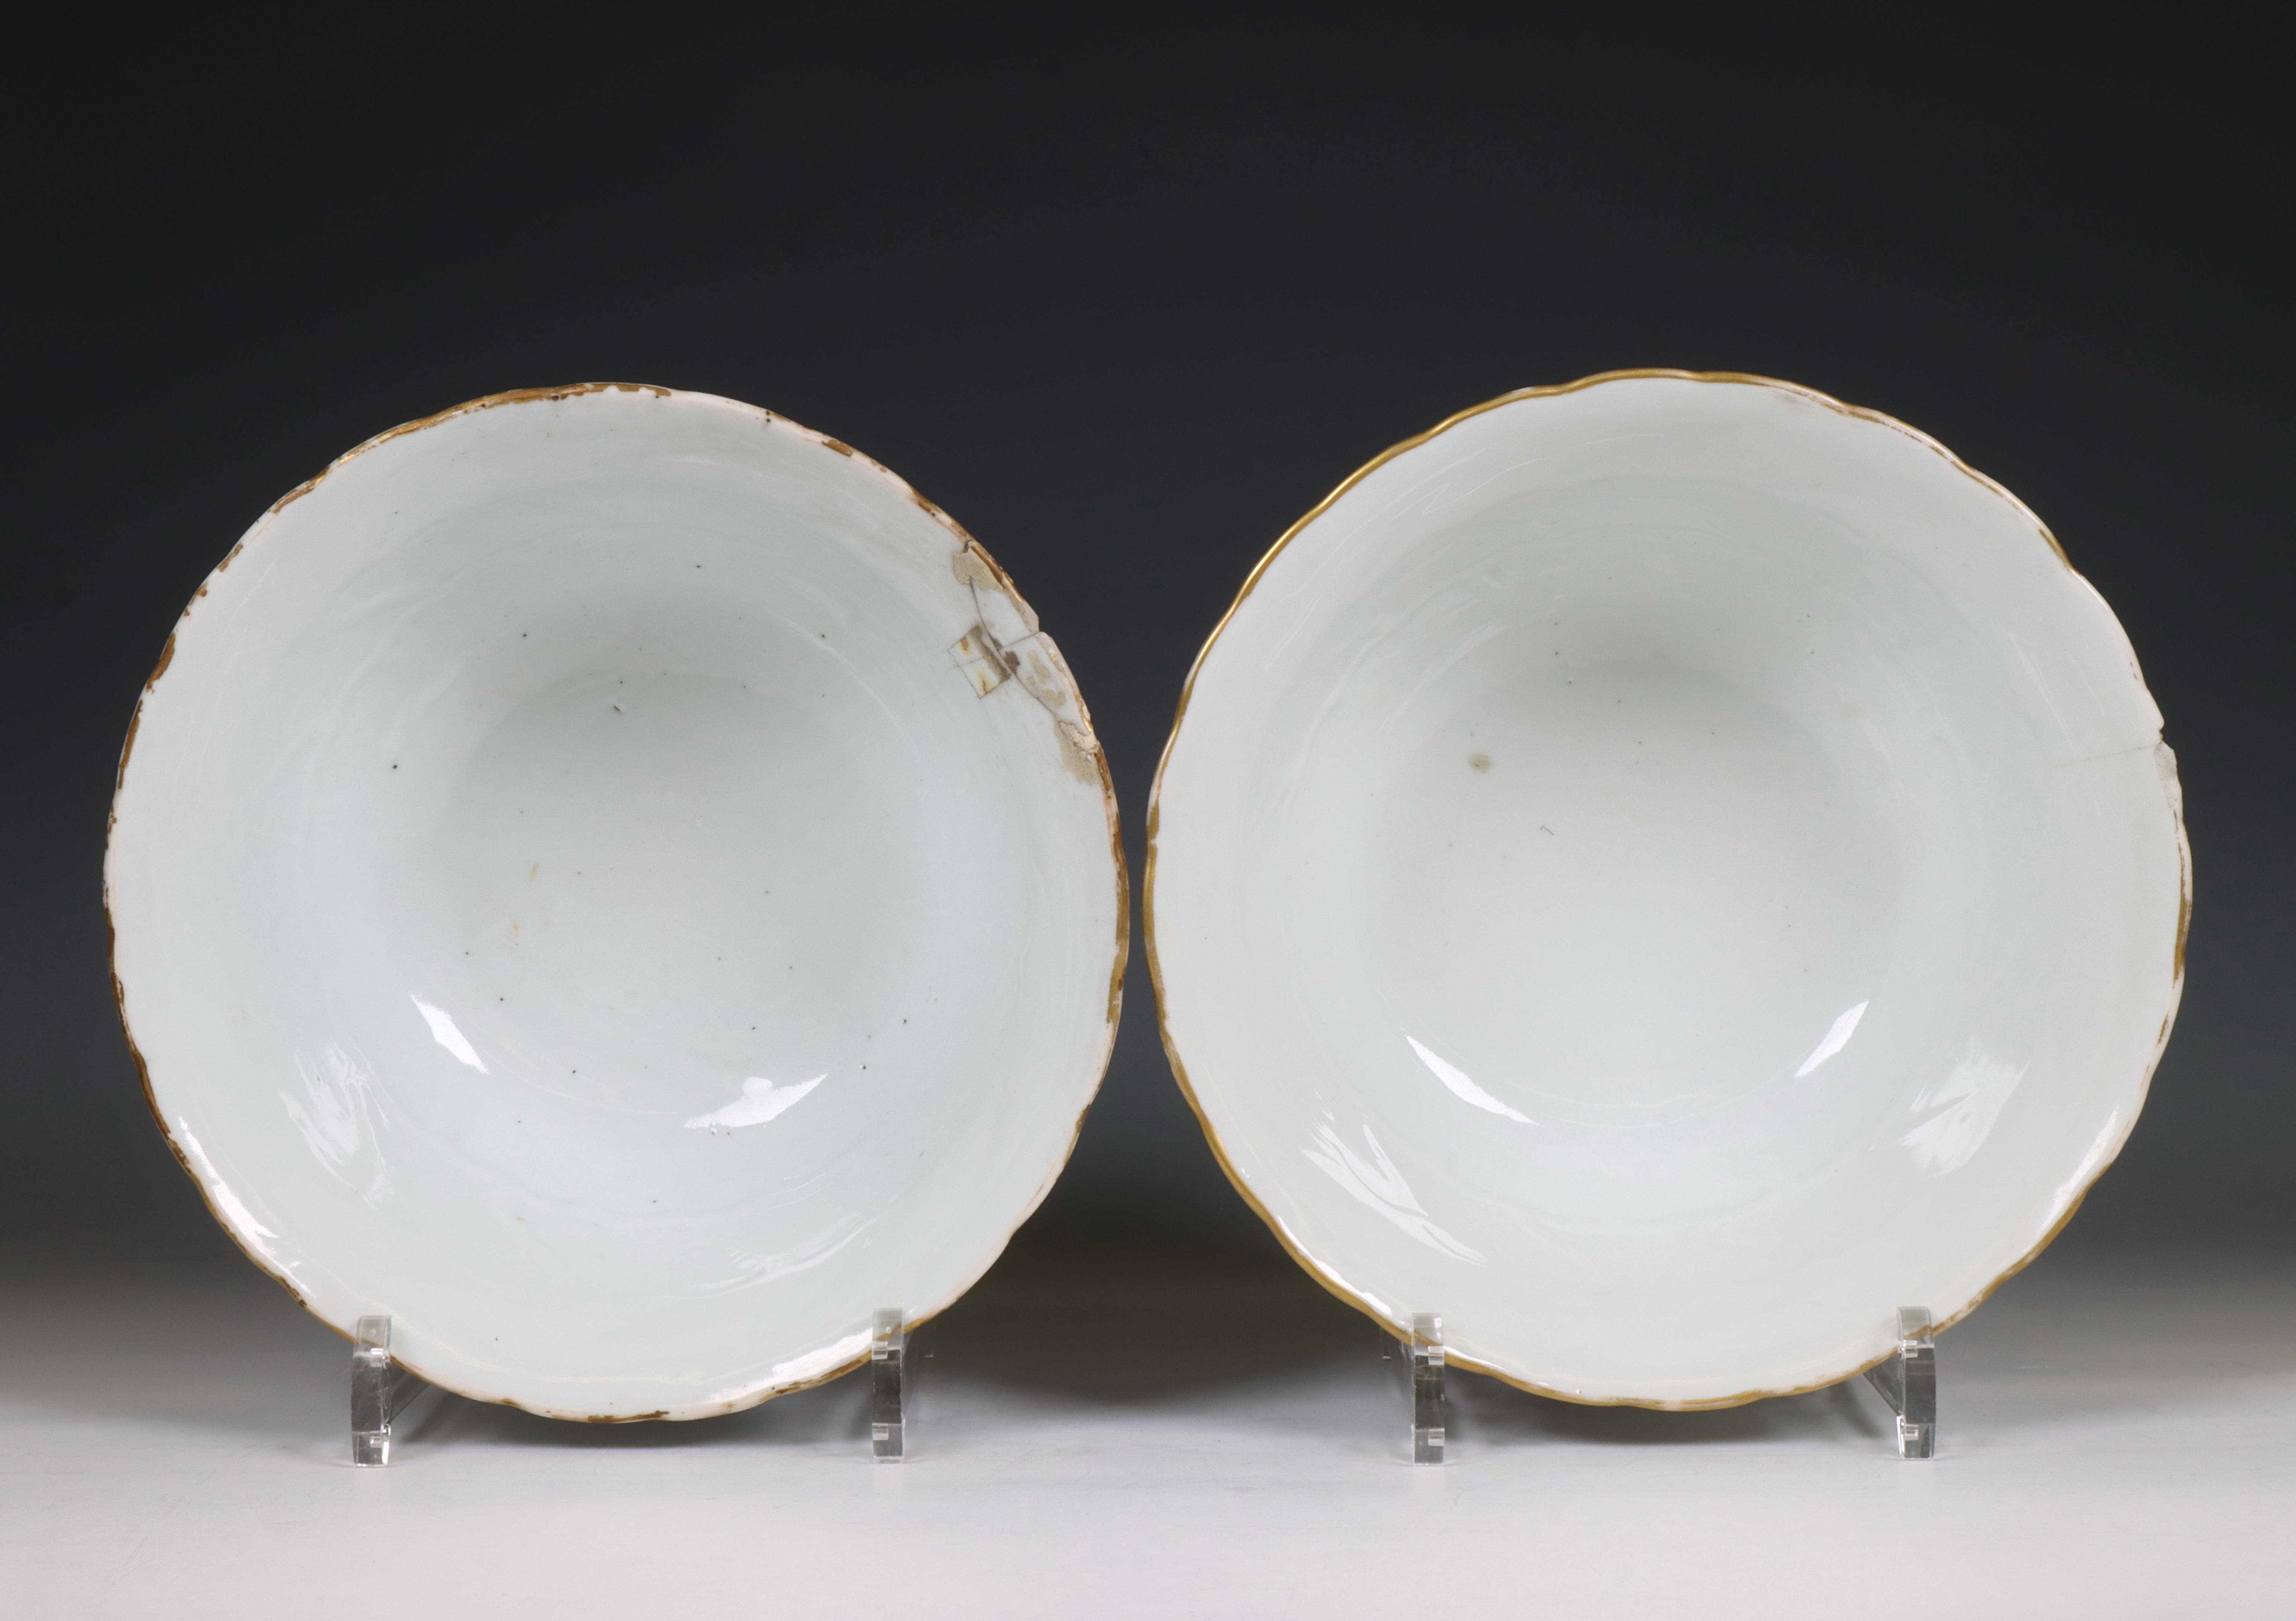 China, two famille rose porcelain 'Wu Shuang Pu' bowls, late Qing dynasty (1644-1912), - Image 8 of 9